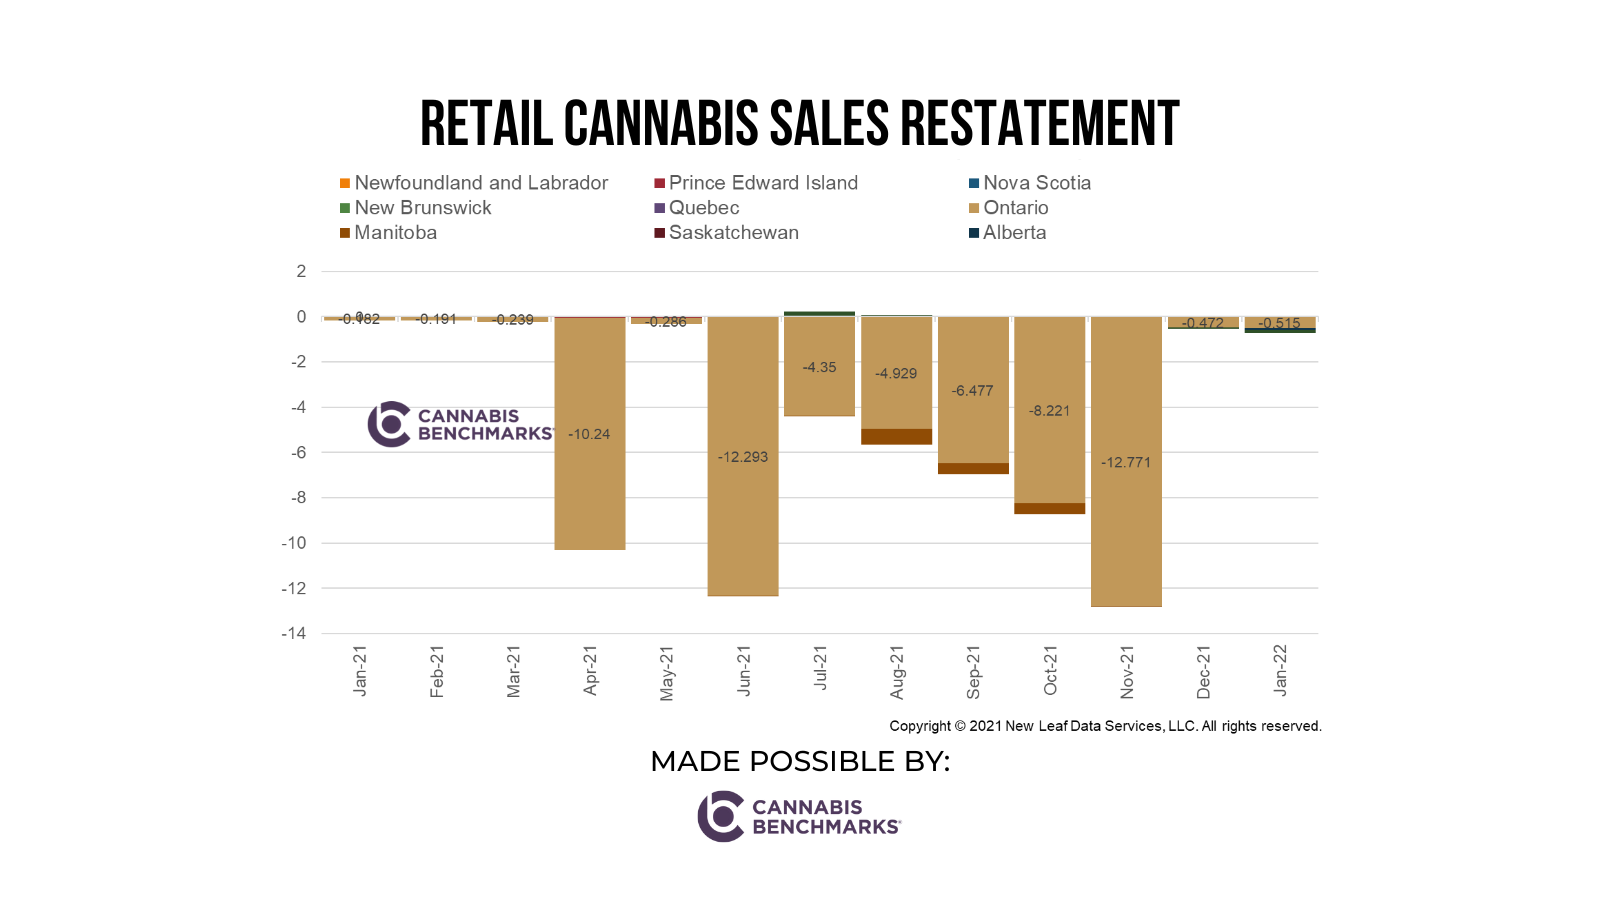 cannabis news about revised cannabis sales figures in canada